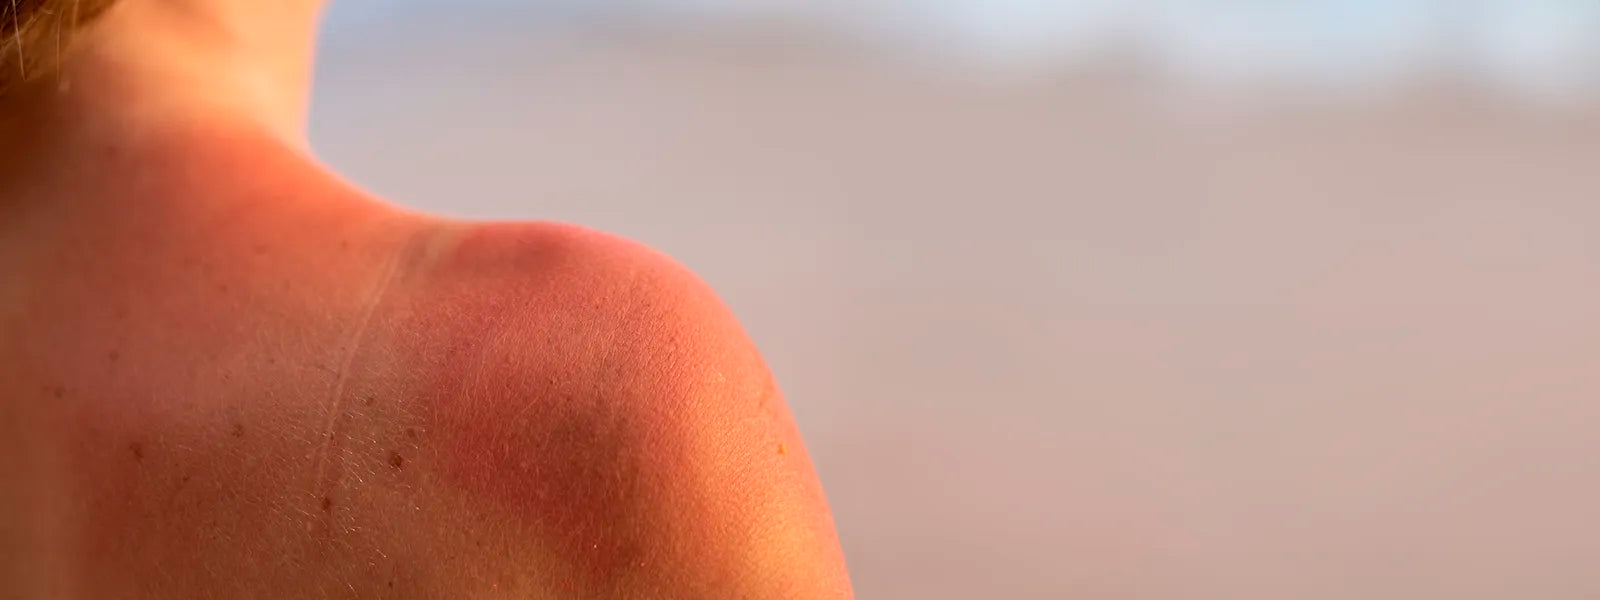 Sun Damage: What You Need To Know